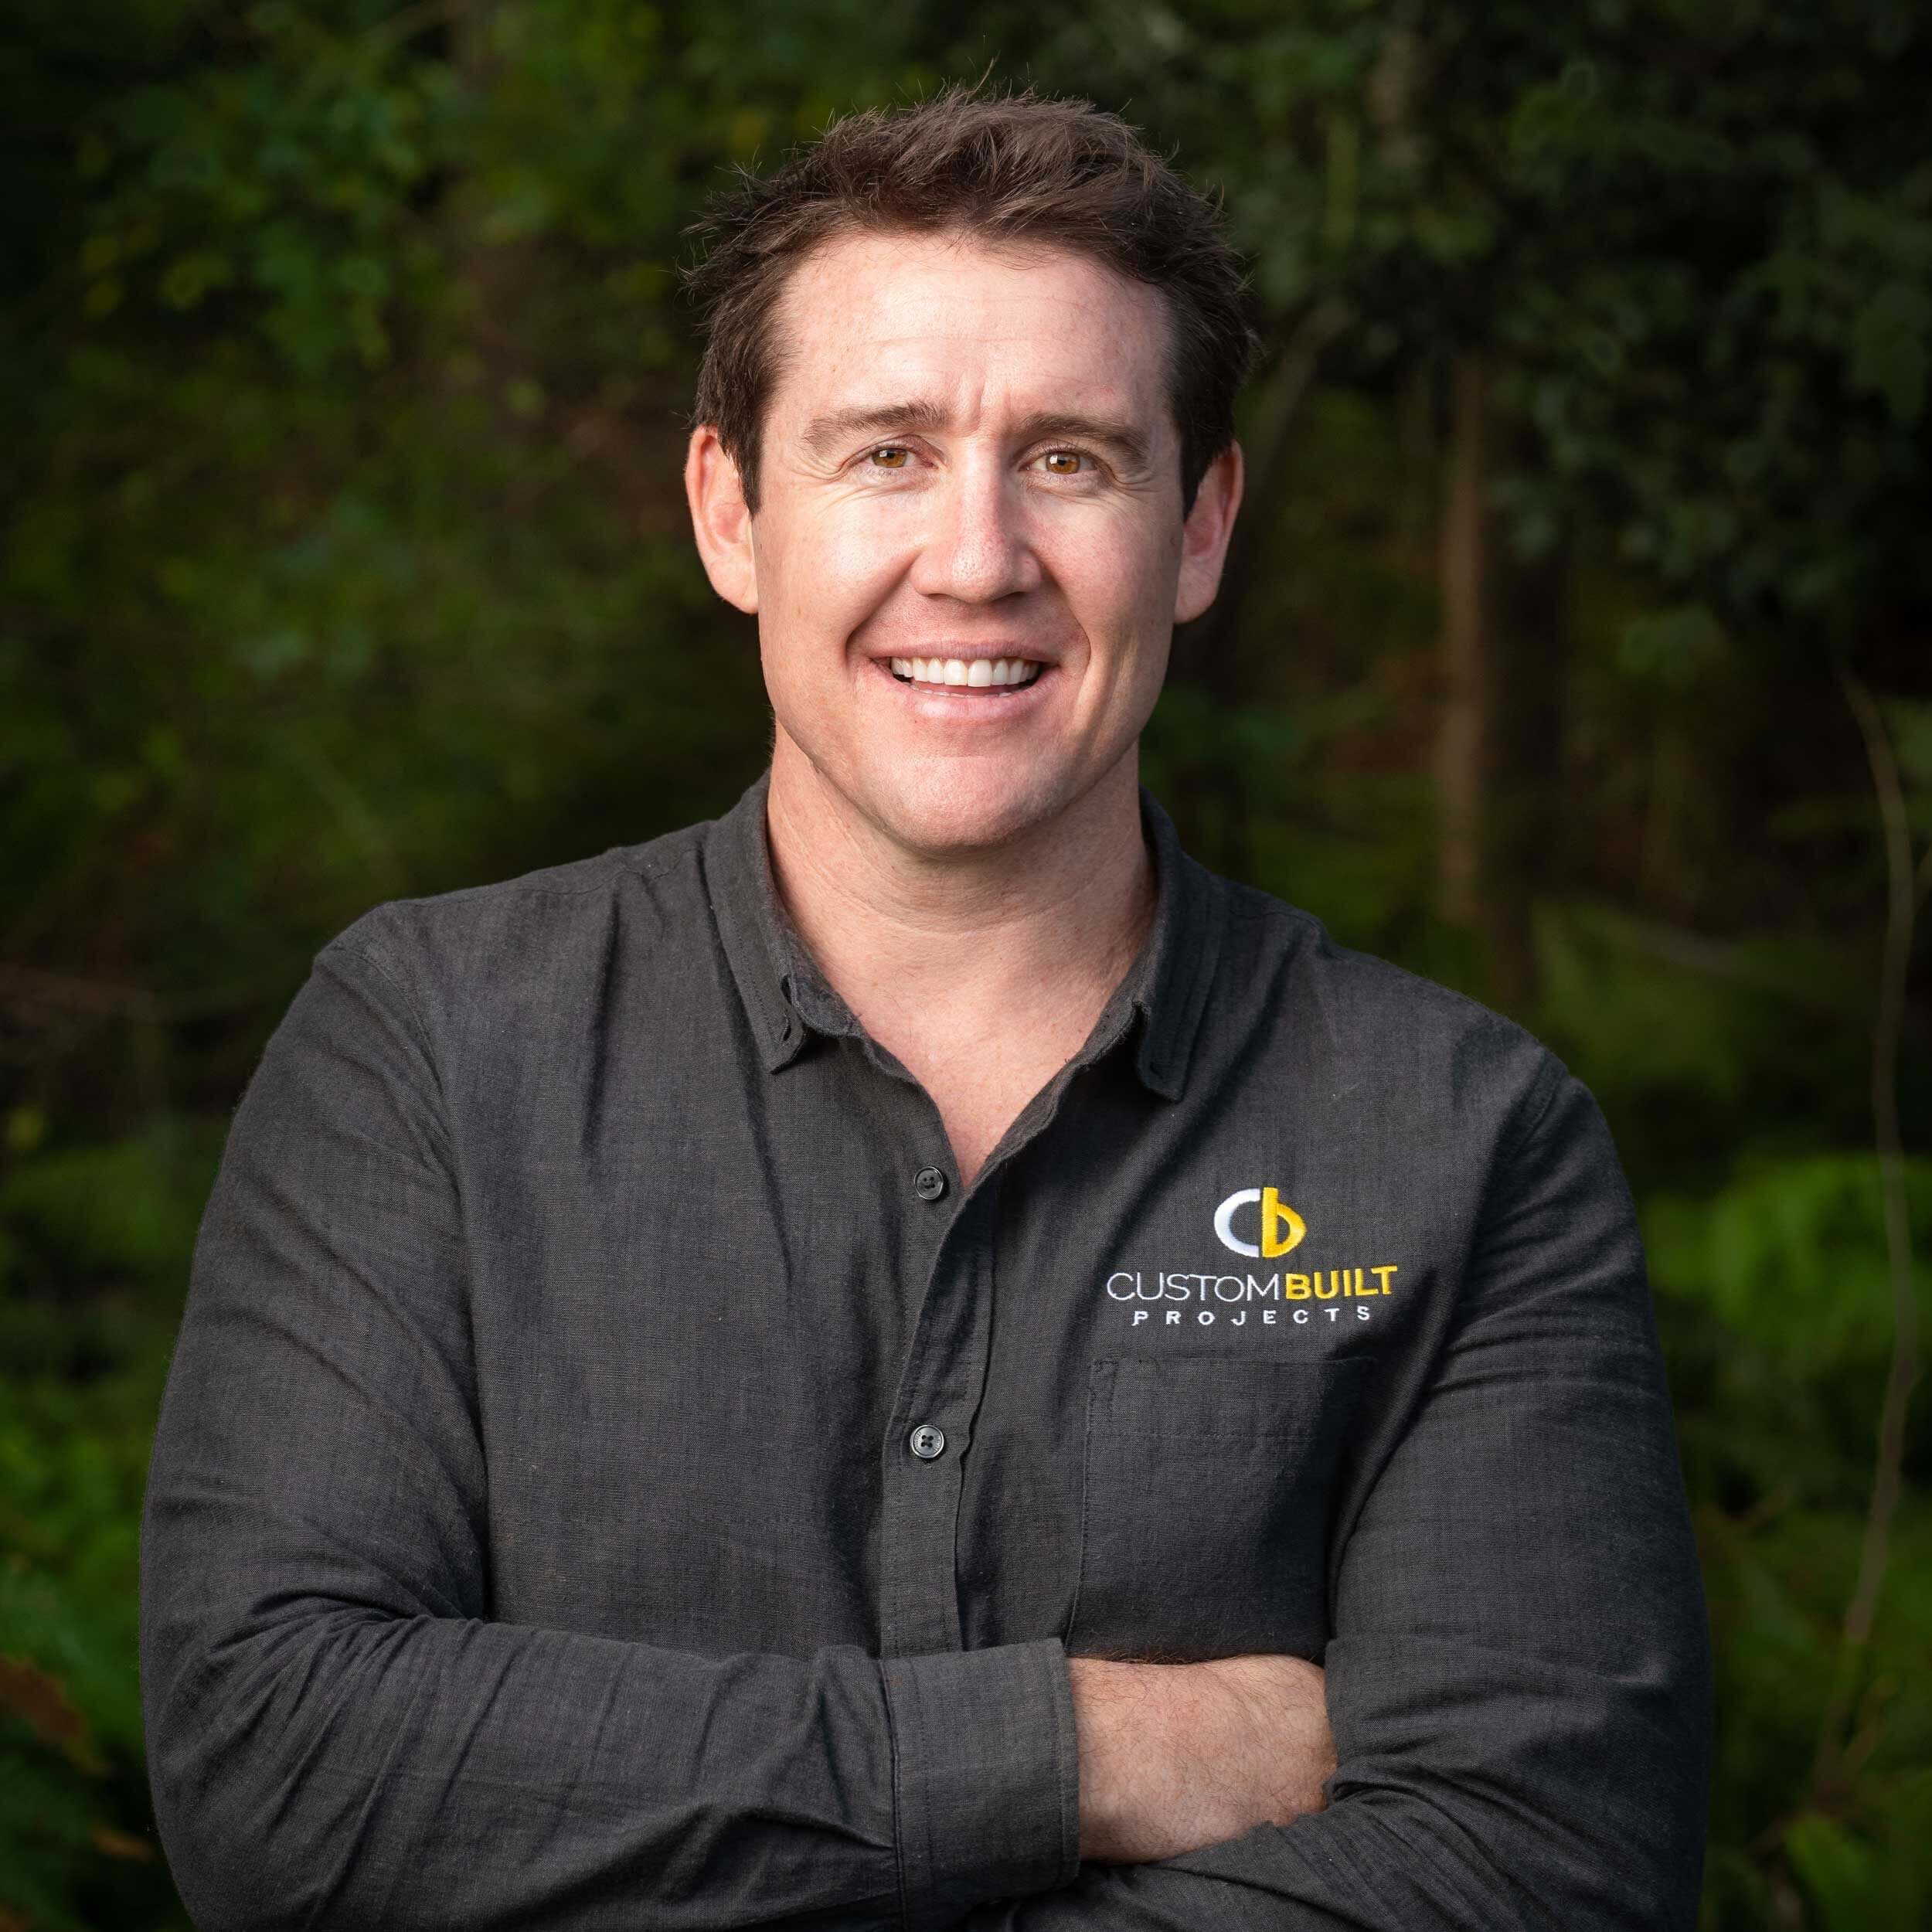 A smiling man in a gray shirt with a "Custom Built Projects" logo on it, standing outdoors with lush greenery blurred in the background. He appears confident and approachable near Port Stephens.